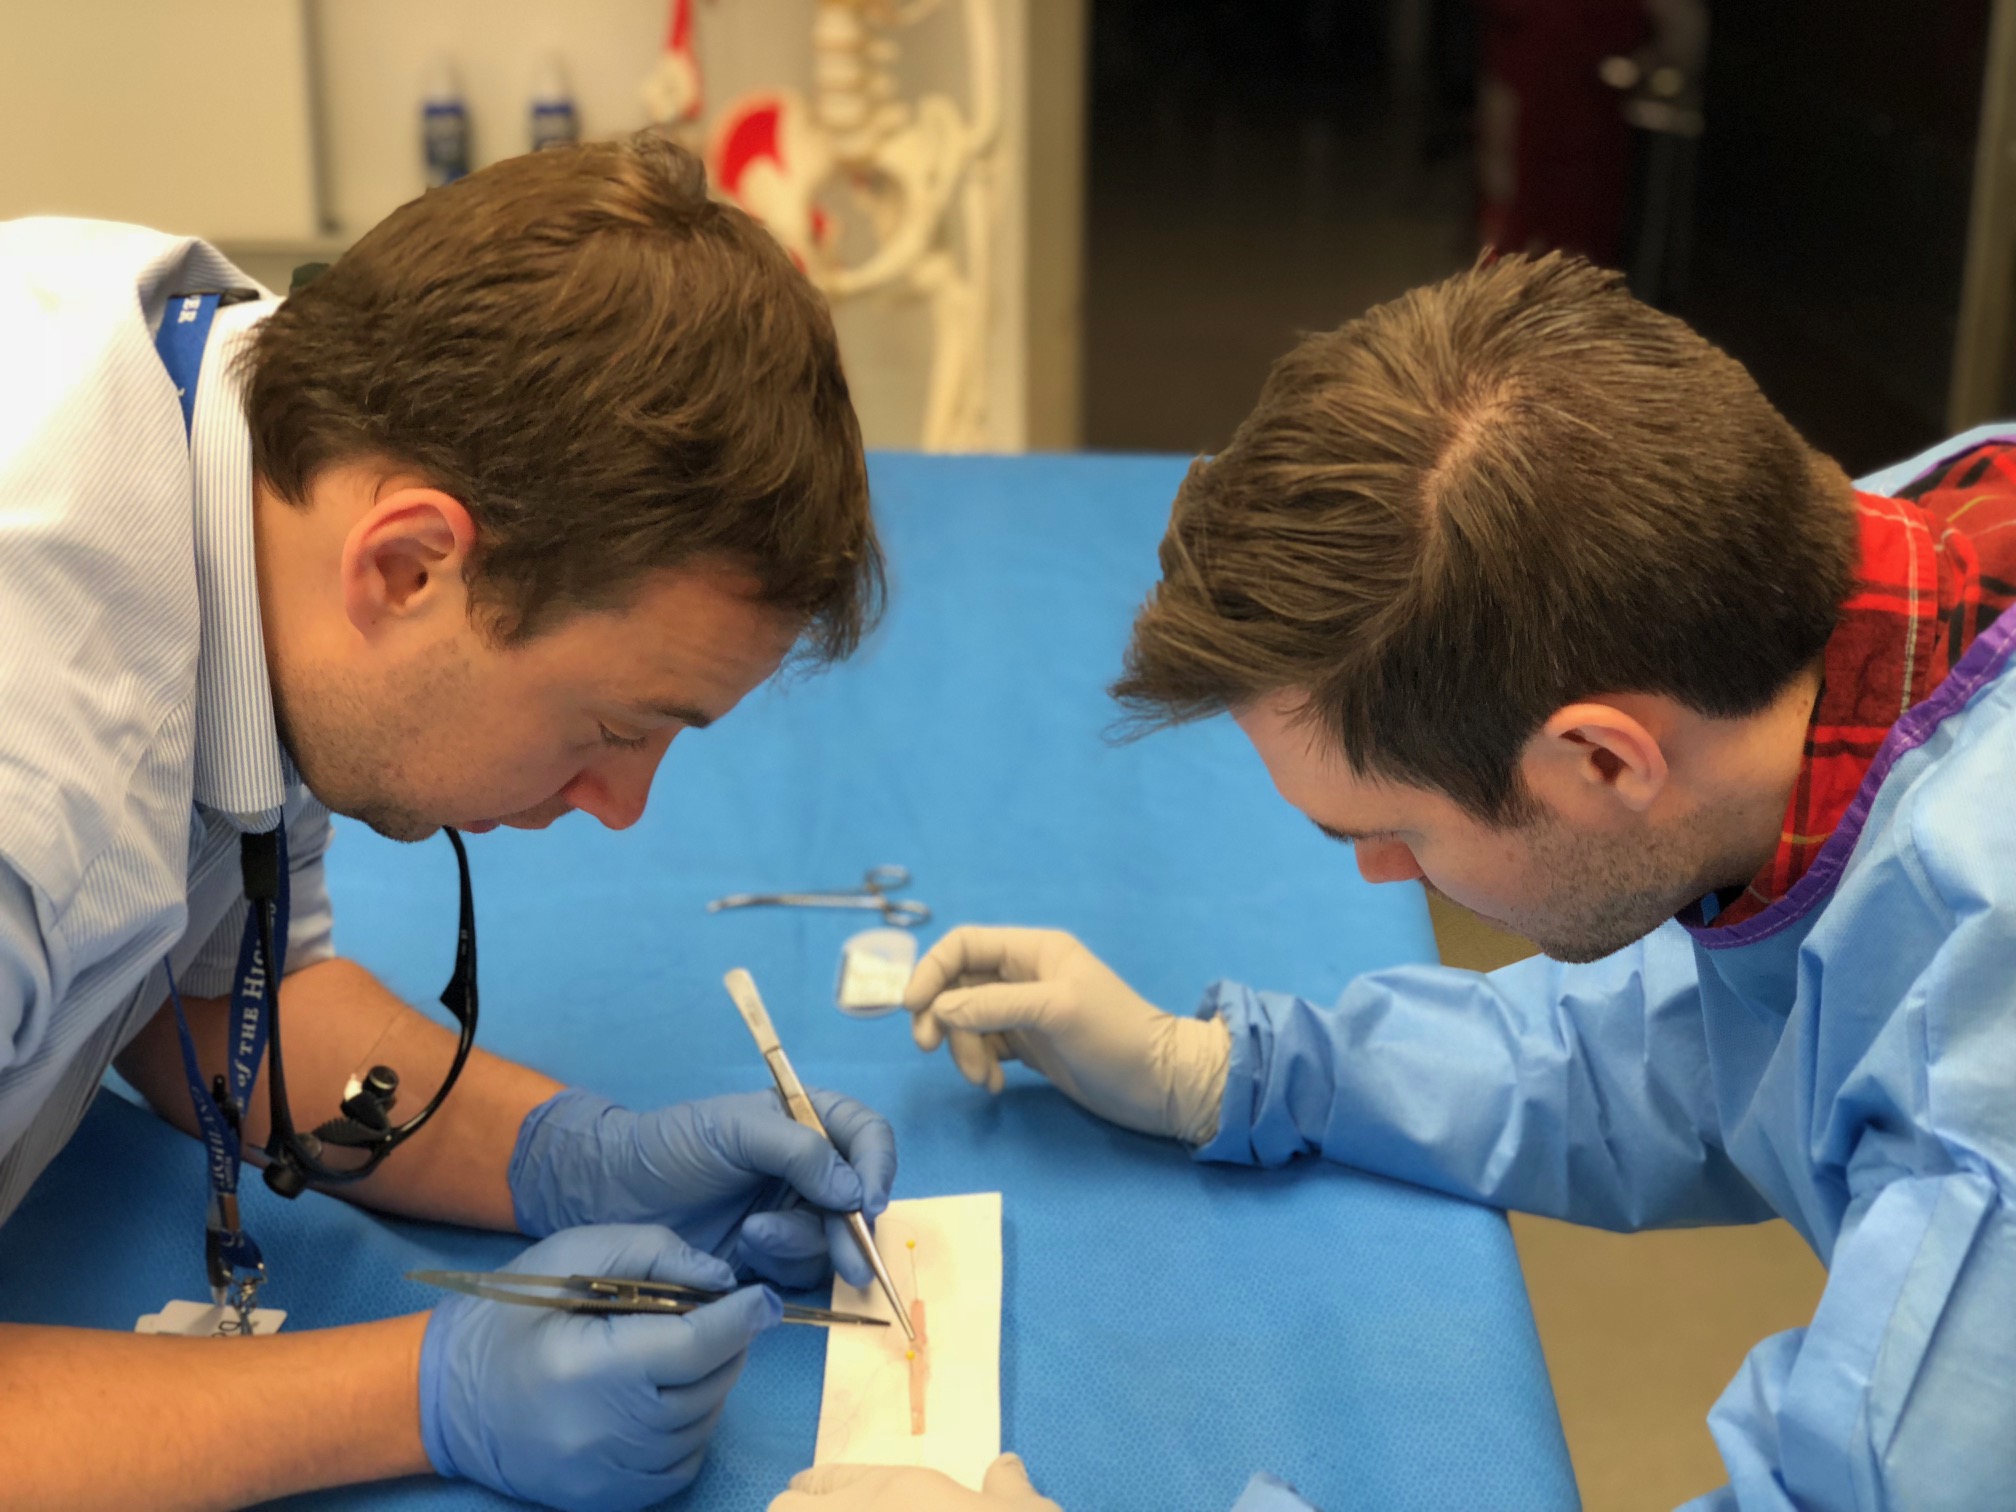 Two residents examine a vein